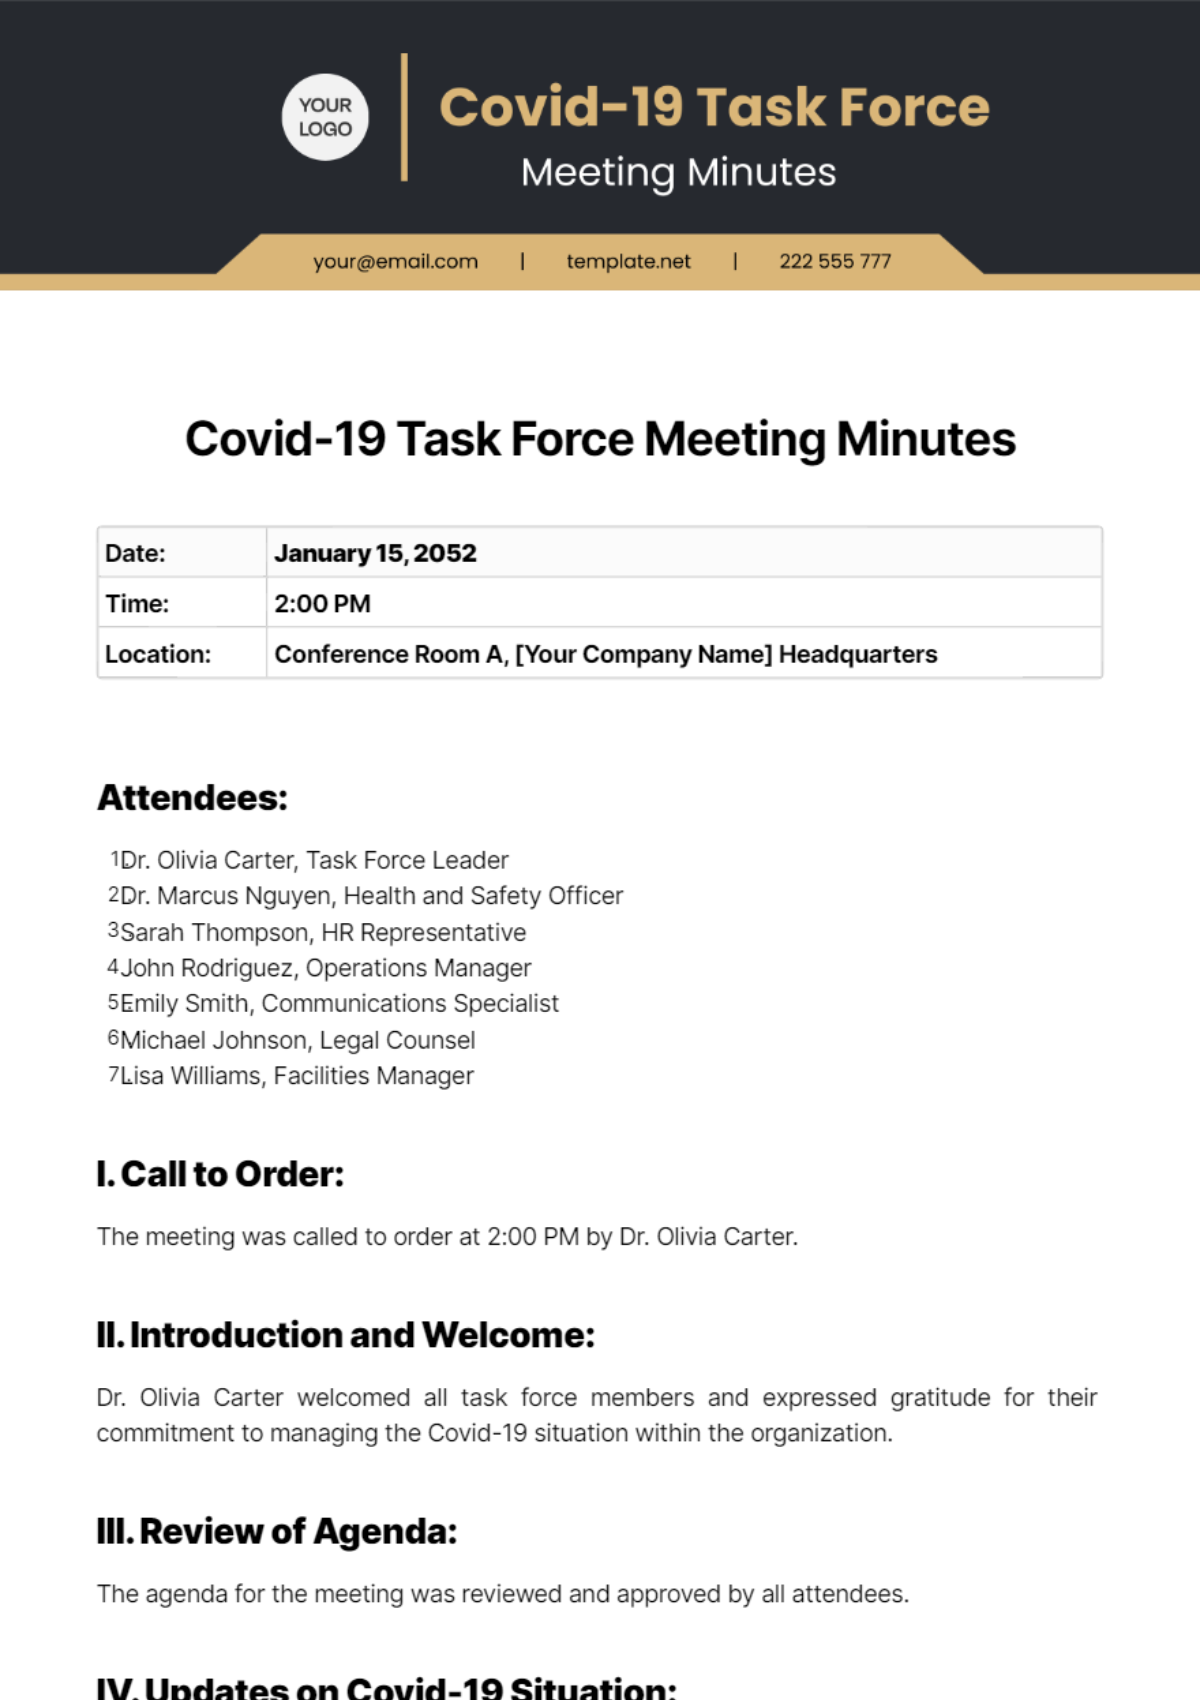 Covid-19 Task Force Meeting Minutes Template